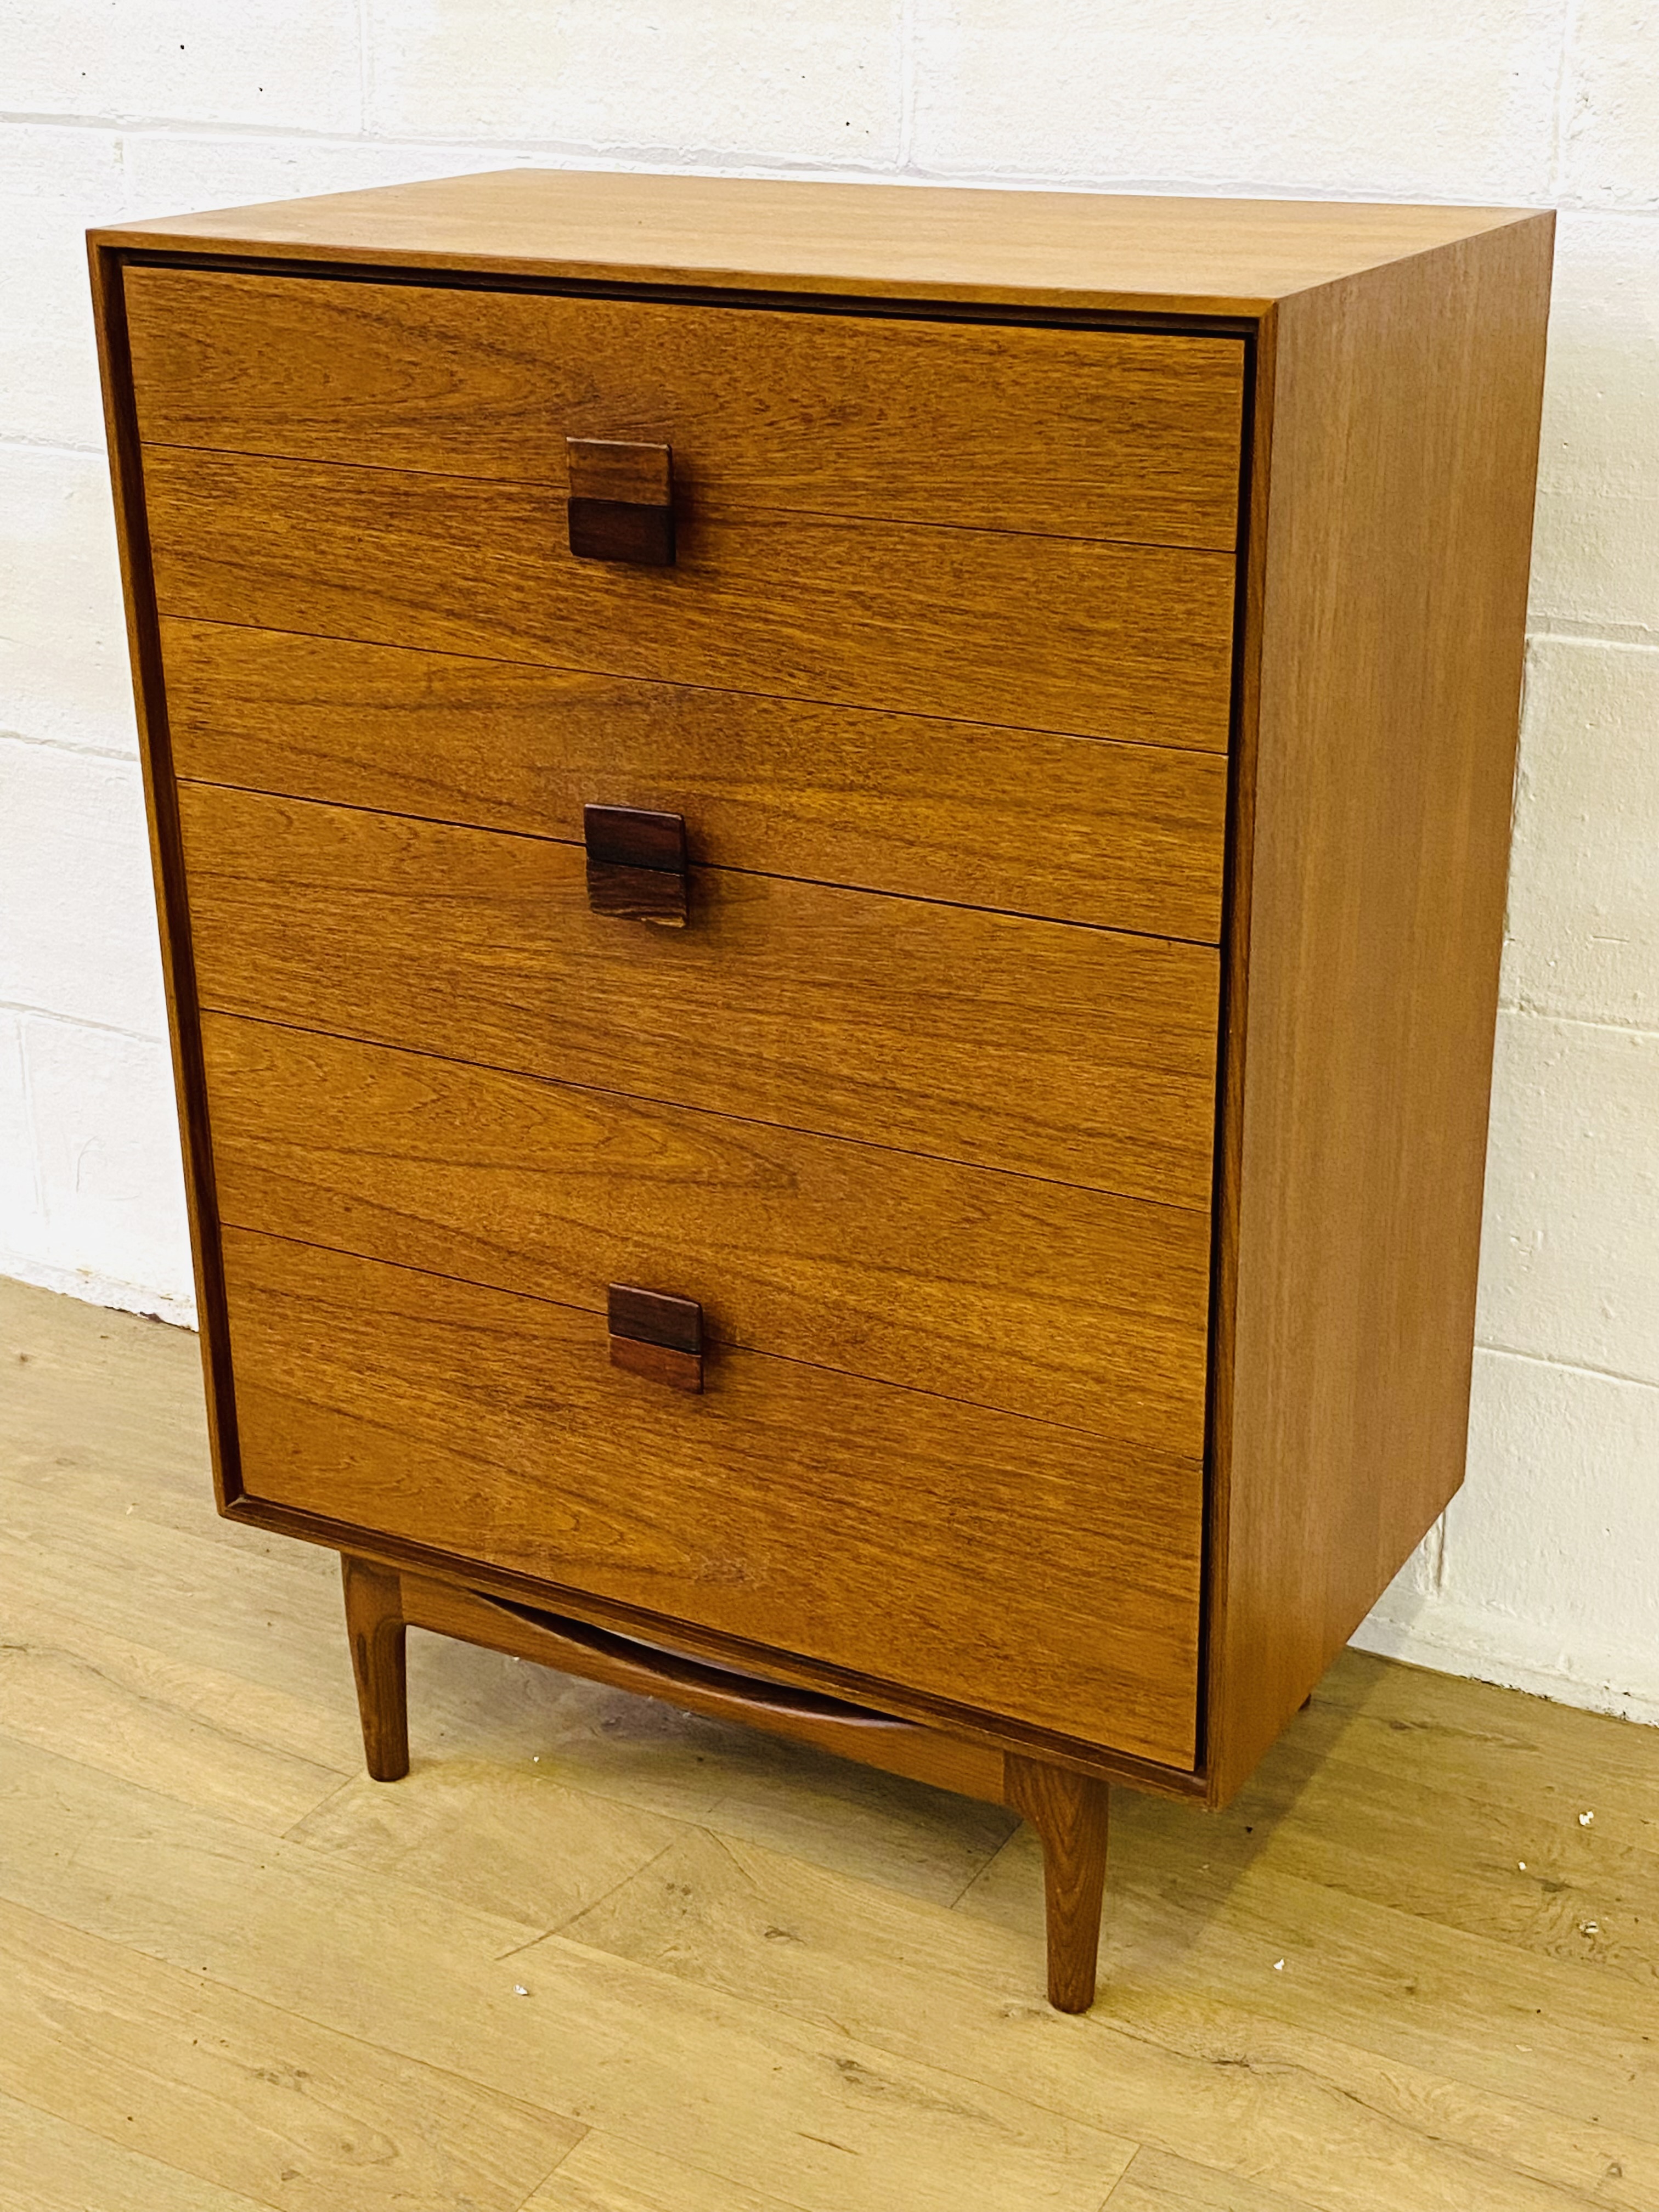 Teak G plan chest of drawers - Image 6 of 6